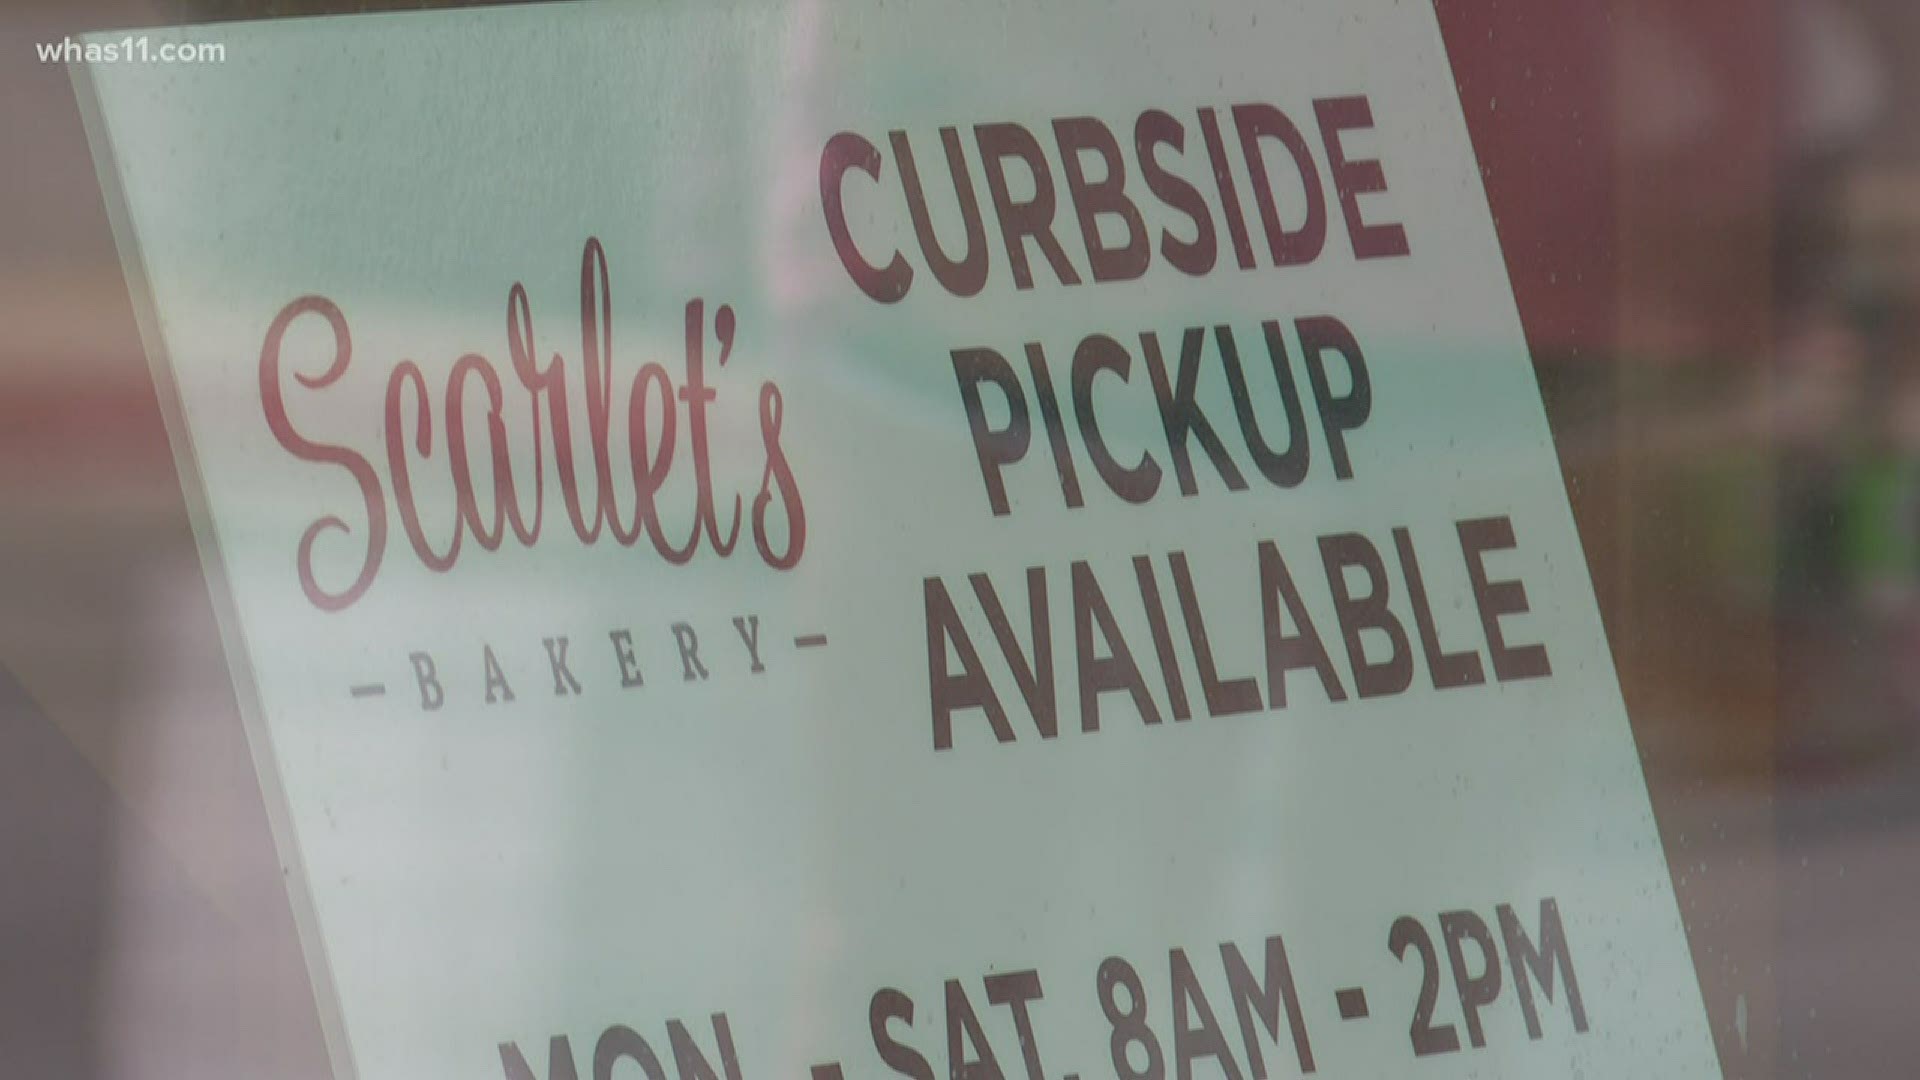 Scarlet's Bakery is one of many businesses shutting its doors for good due to the coronavirus pandemic.